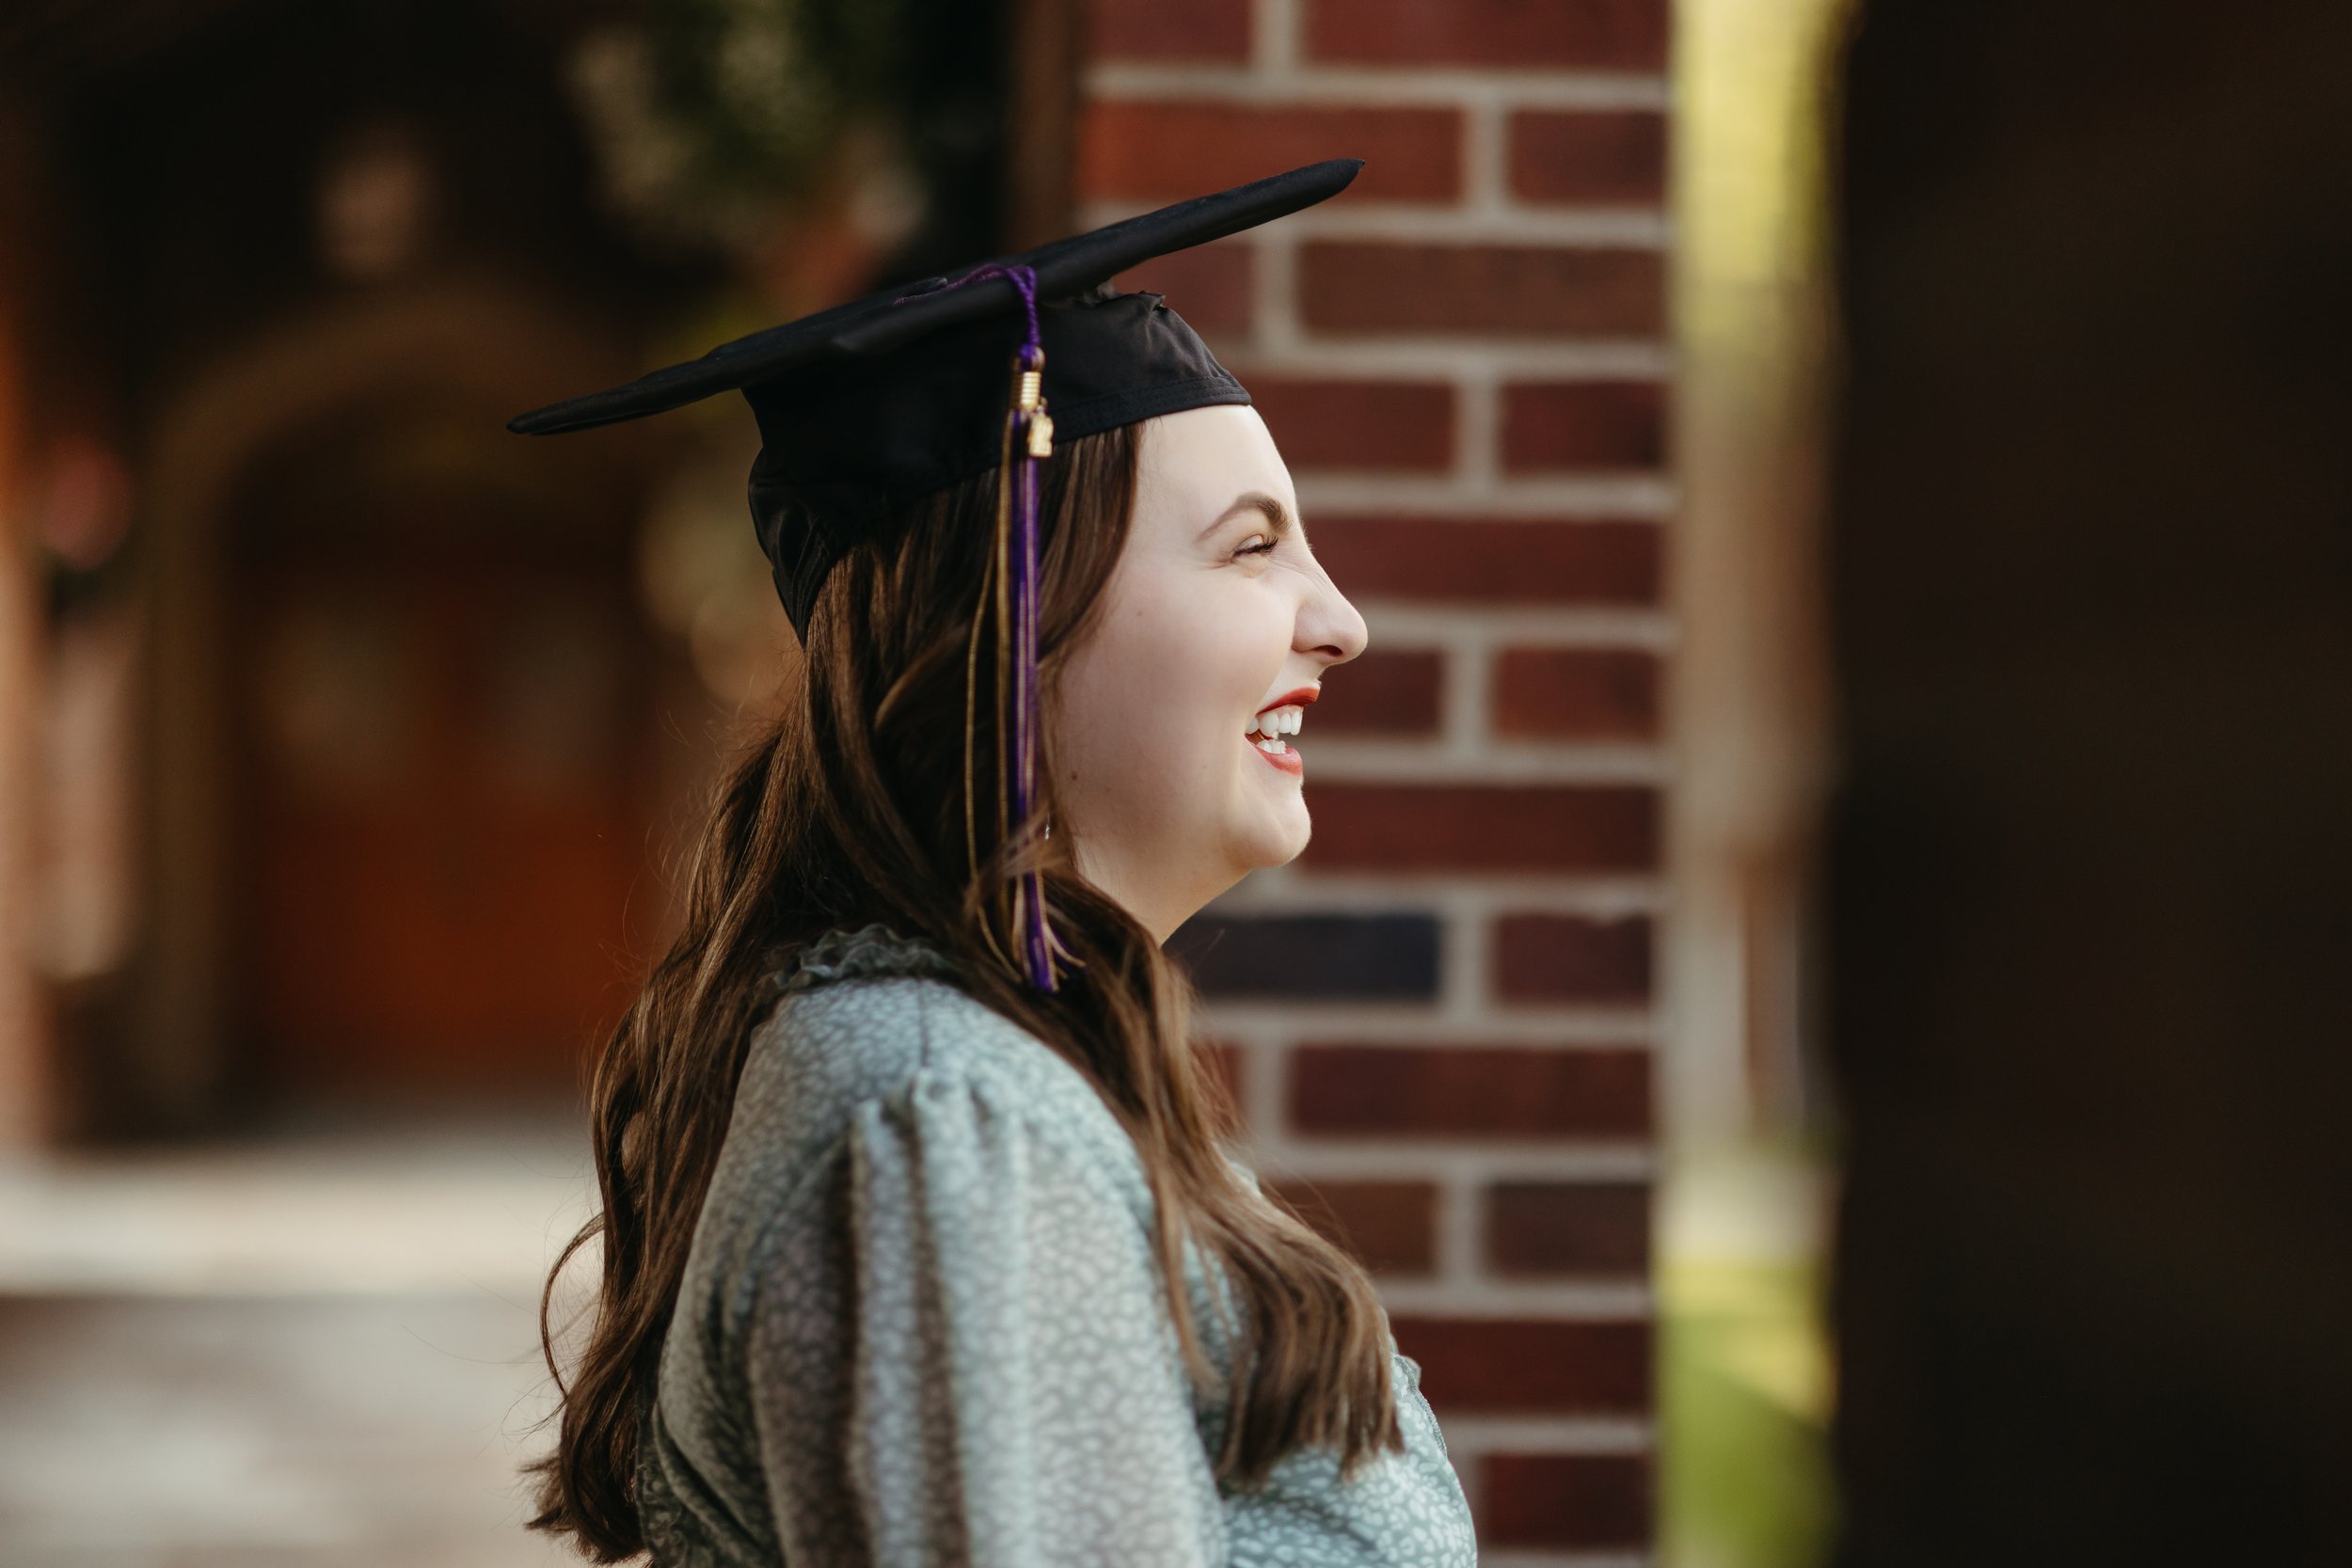  college graduation photos | college graduation pictures | cap and gown pictures | what to wear under cap and gown | what to wear for college graduation photoshoot | college graduation photoshoot | college graduation photoshoot ideas | outdoor colleg